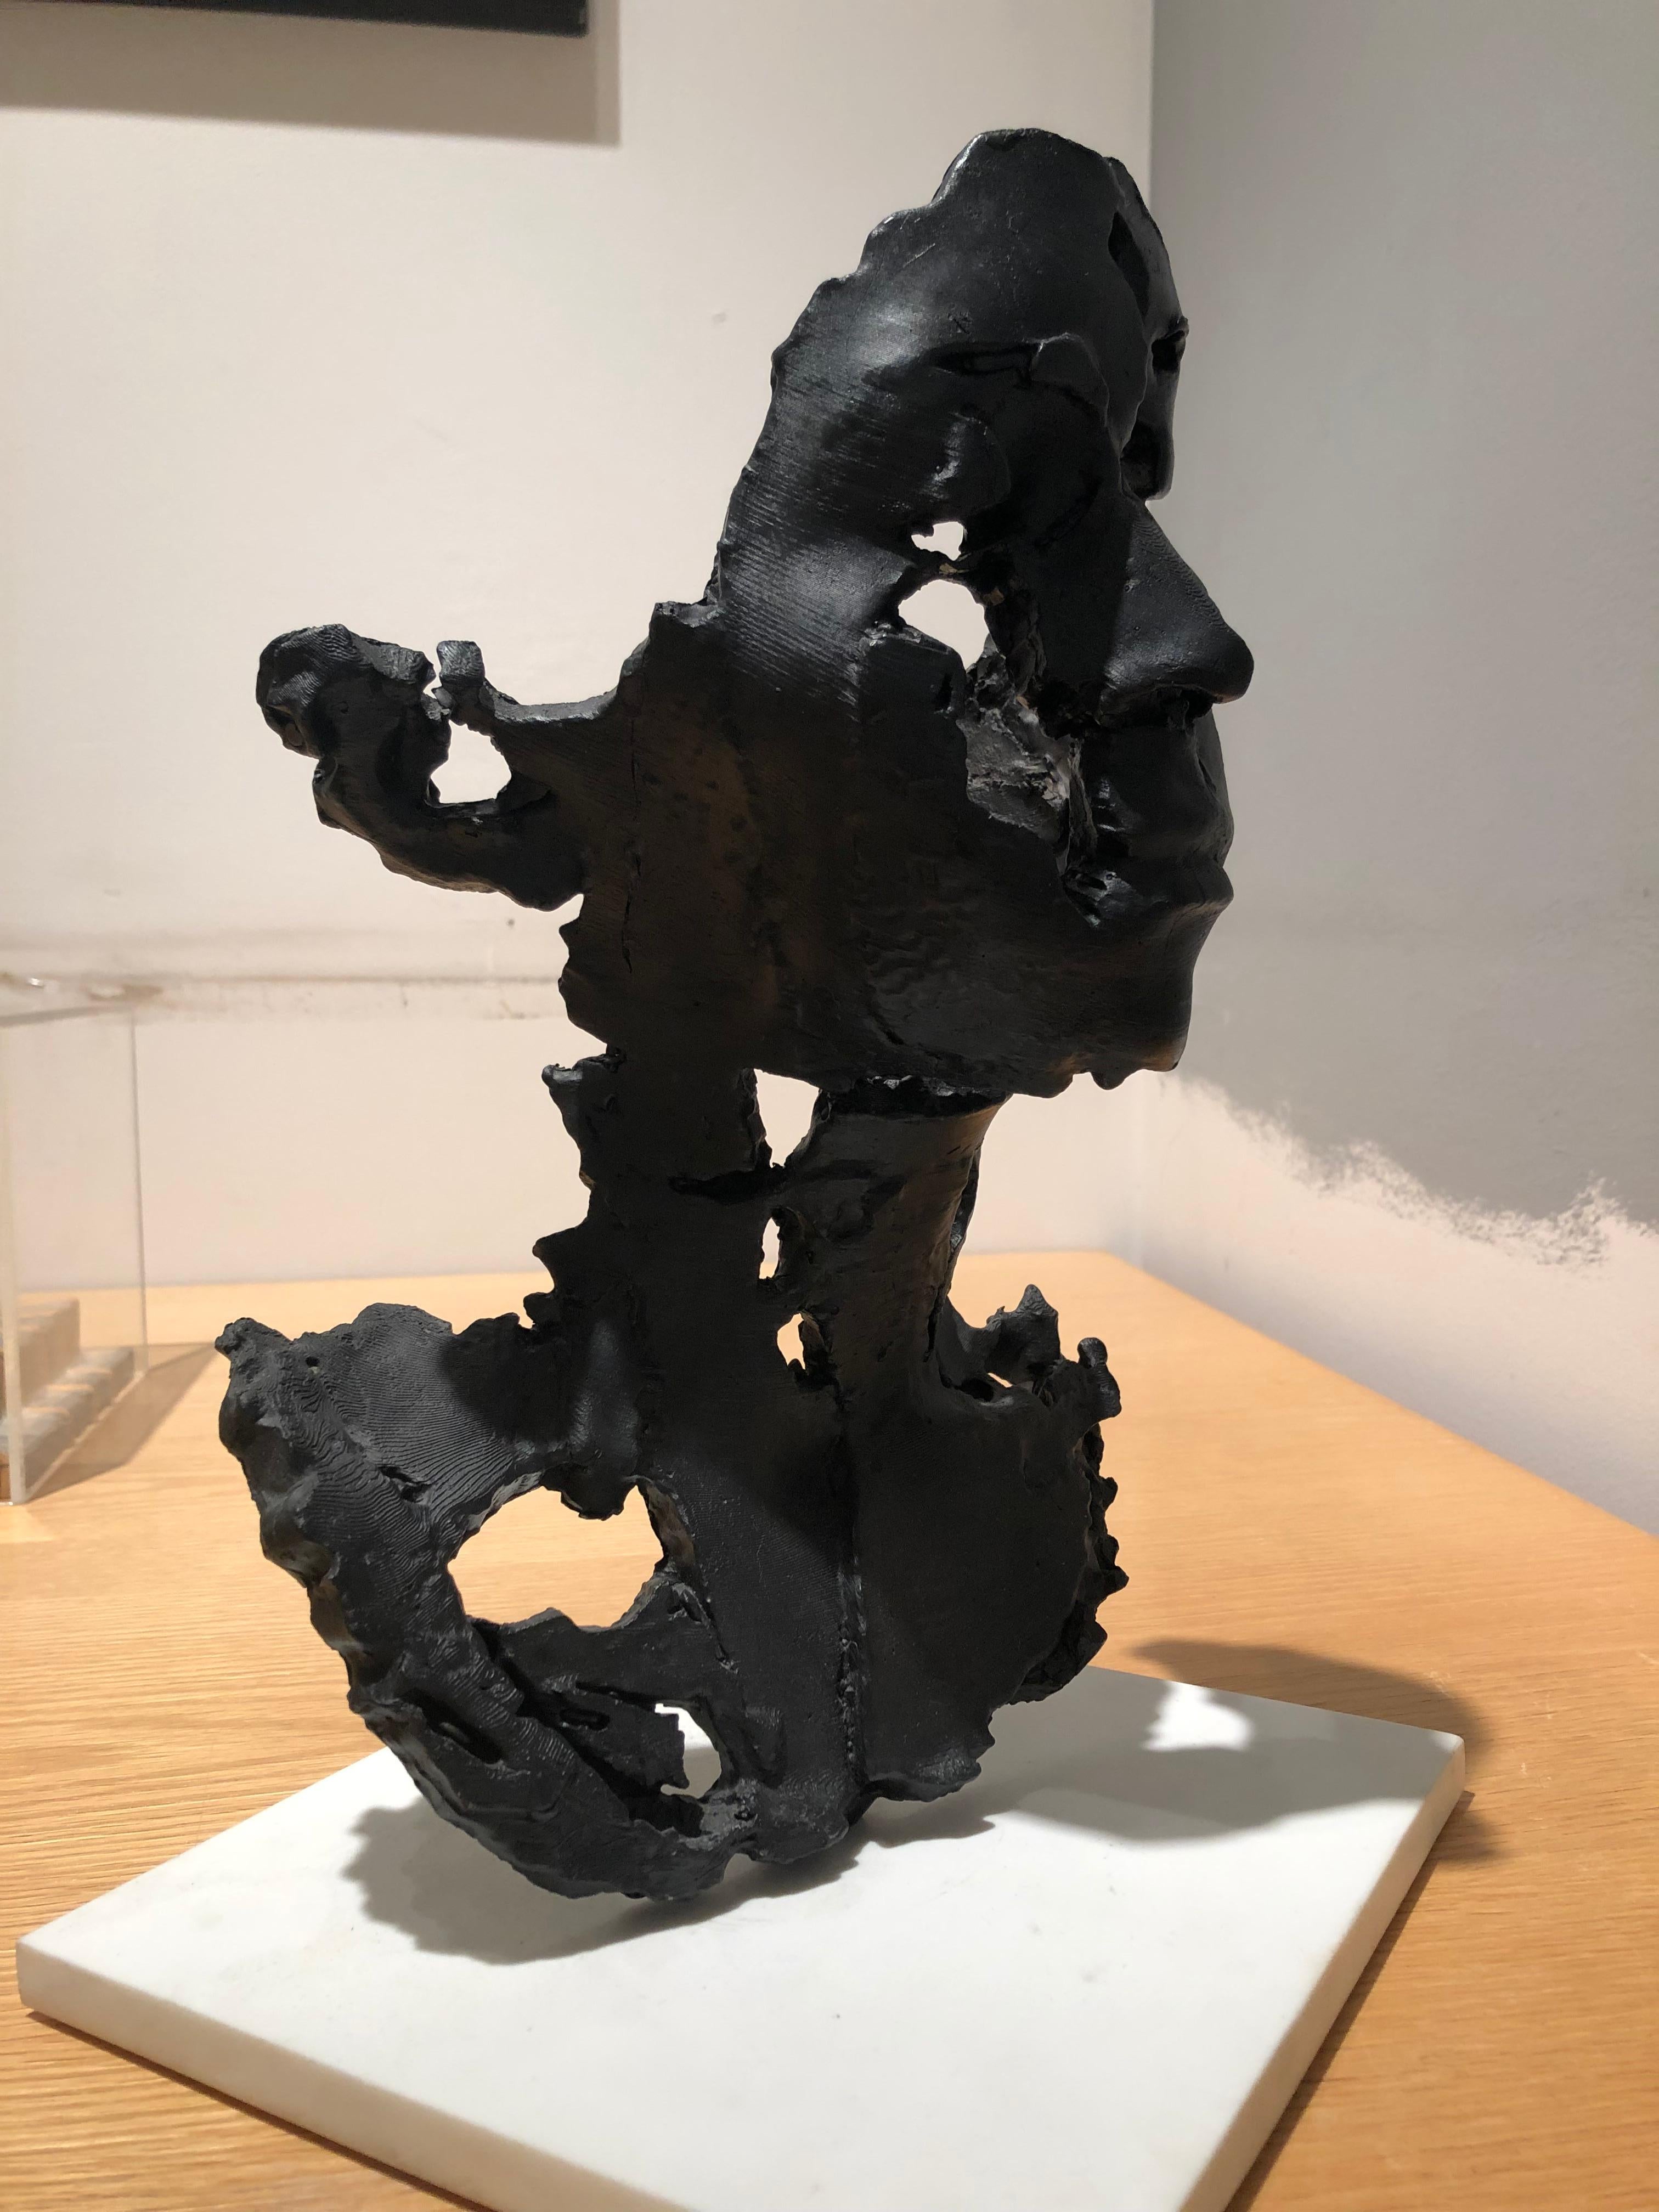 Kahn, L Degrade, 2014, figurative bronze sculture of a woman's face with black patina, cast from a 3D print

Sophie Kahn is a digital artist and sculptor, whose work addresses technology’s failure to capture the unstable human body. Sophie's work